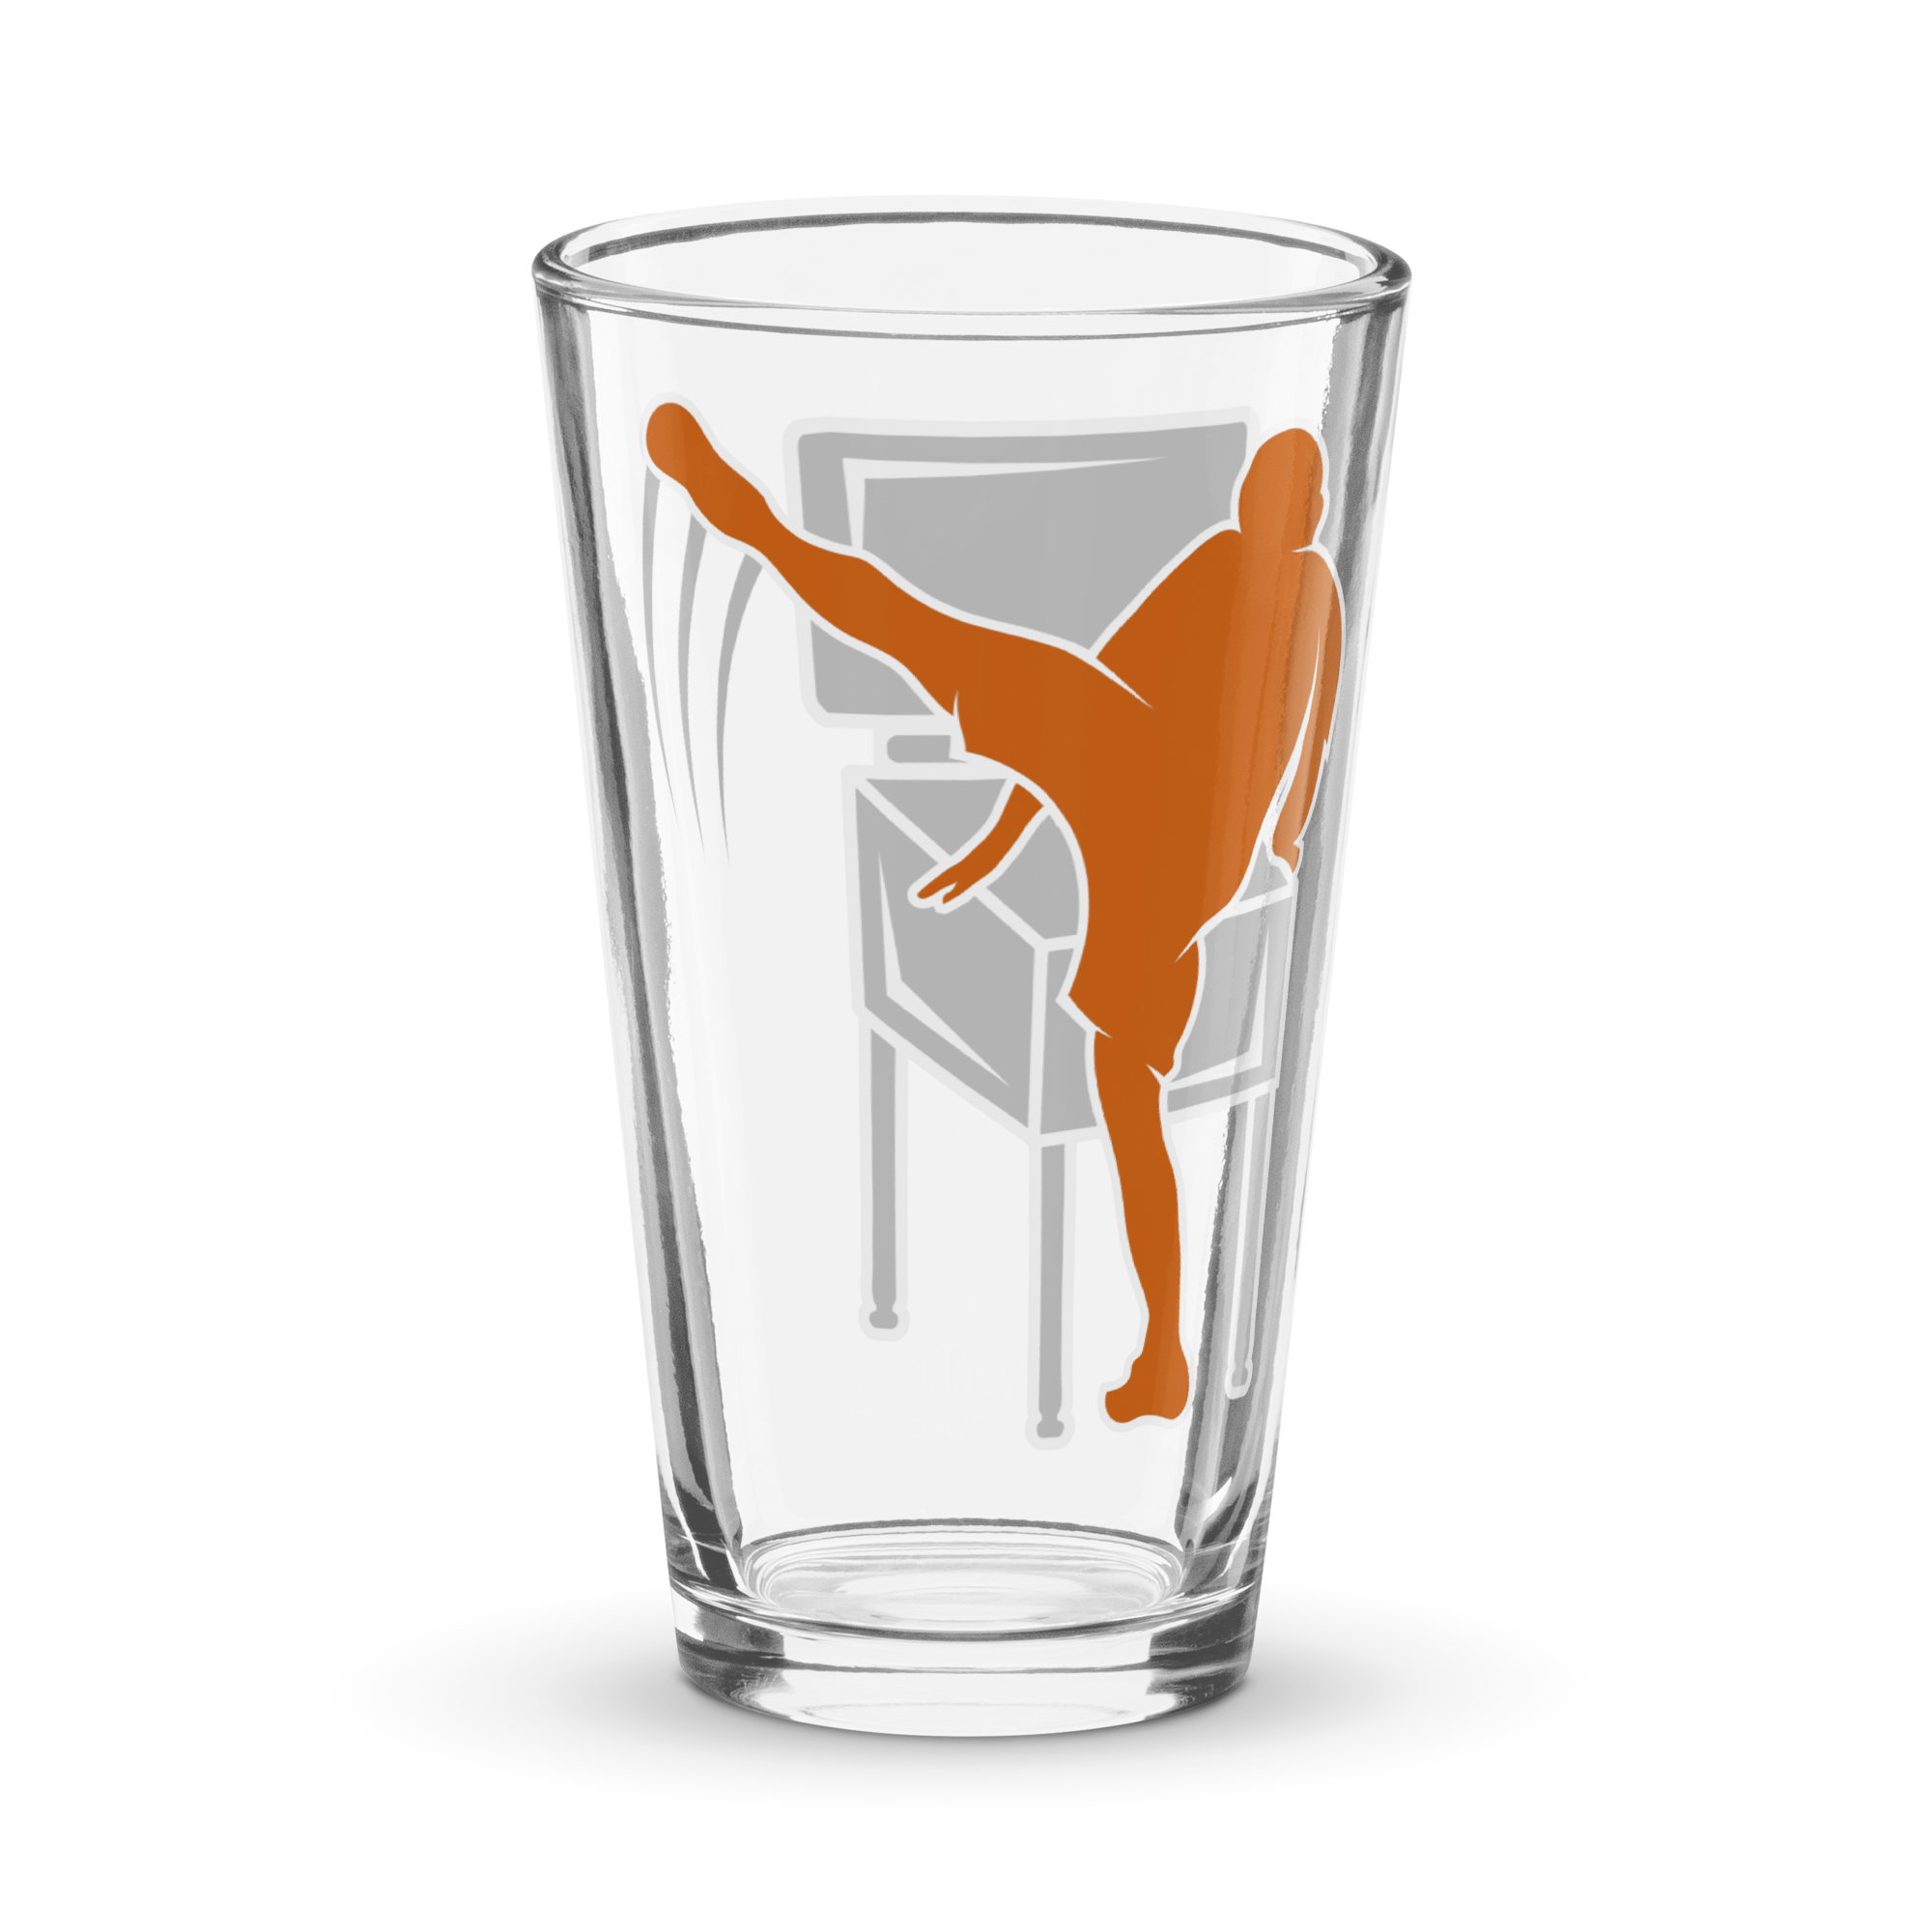 Silverball Swagger - Pint glass